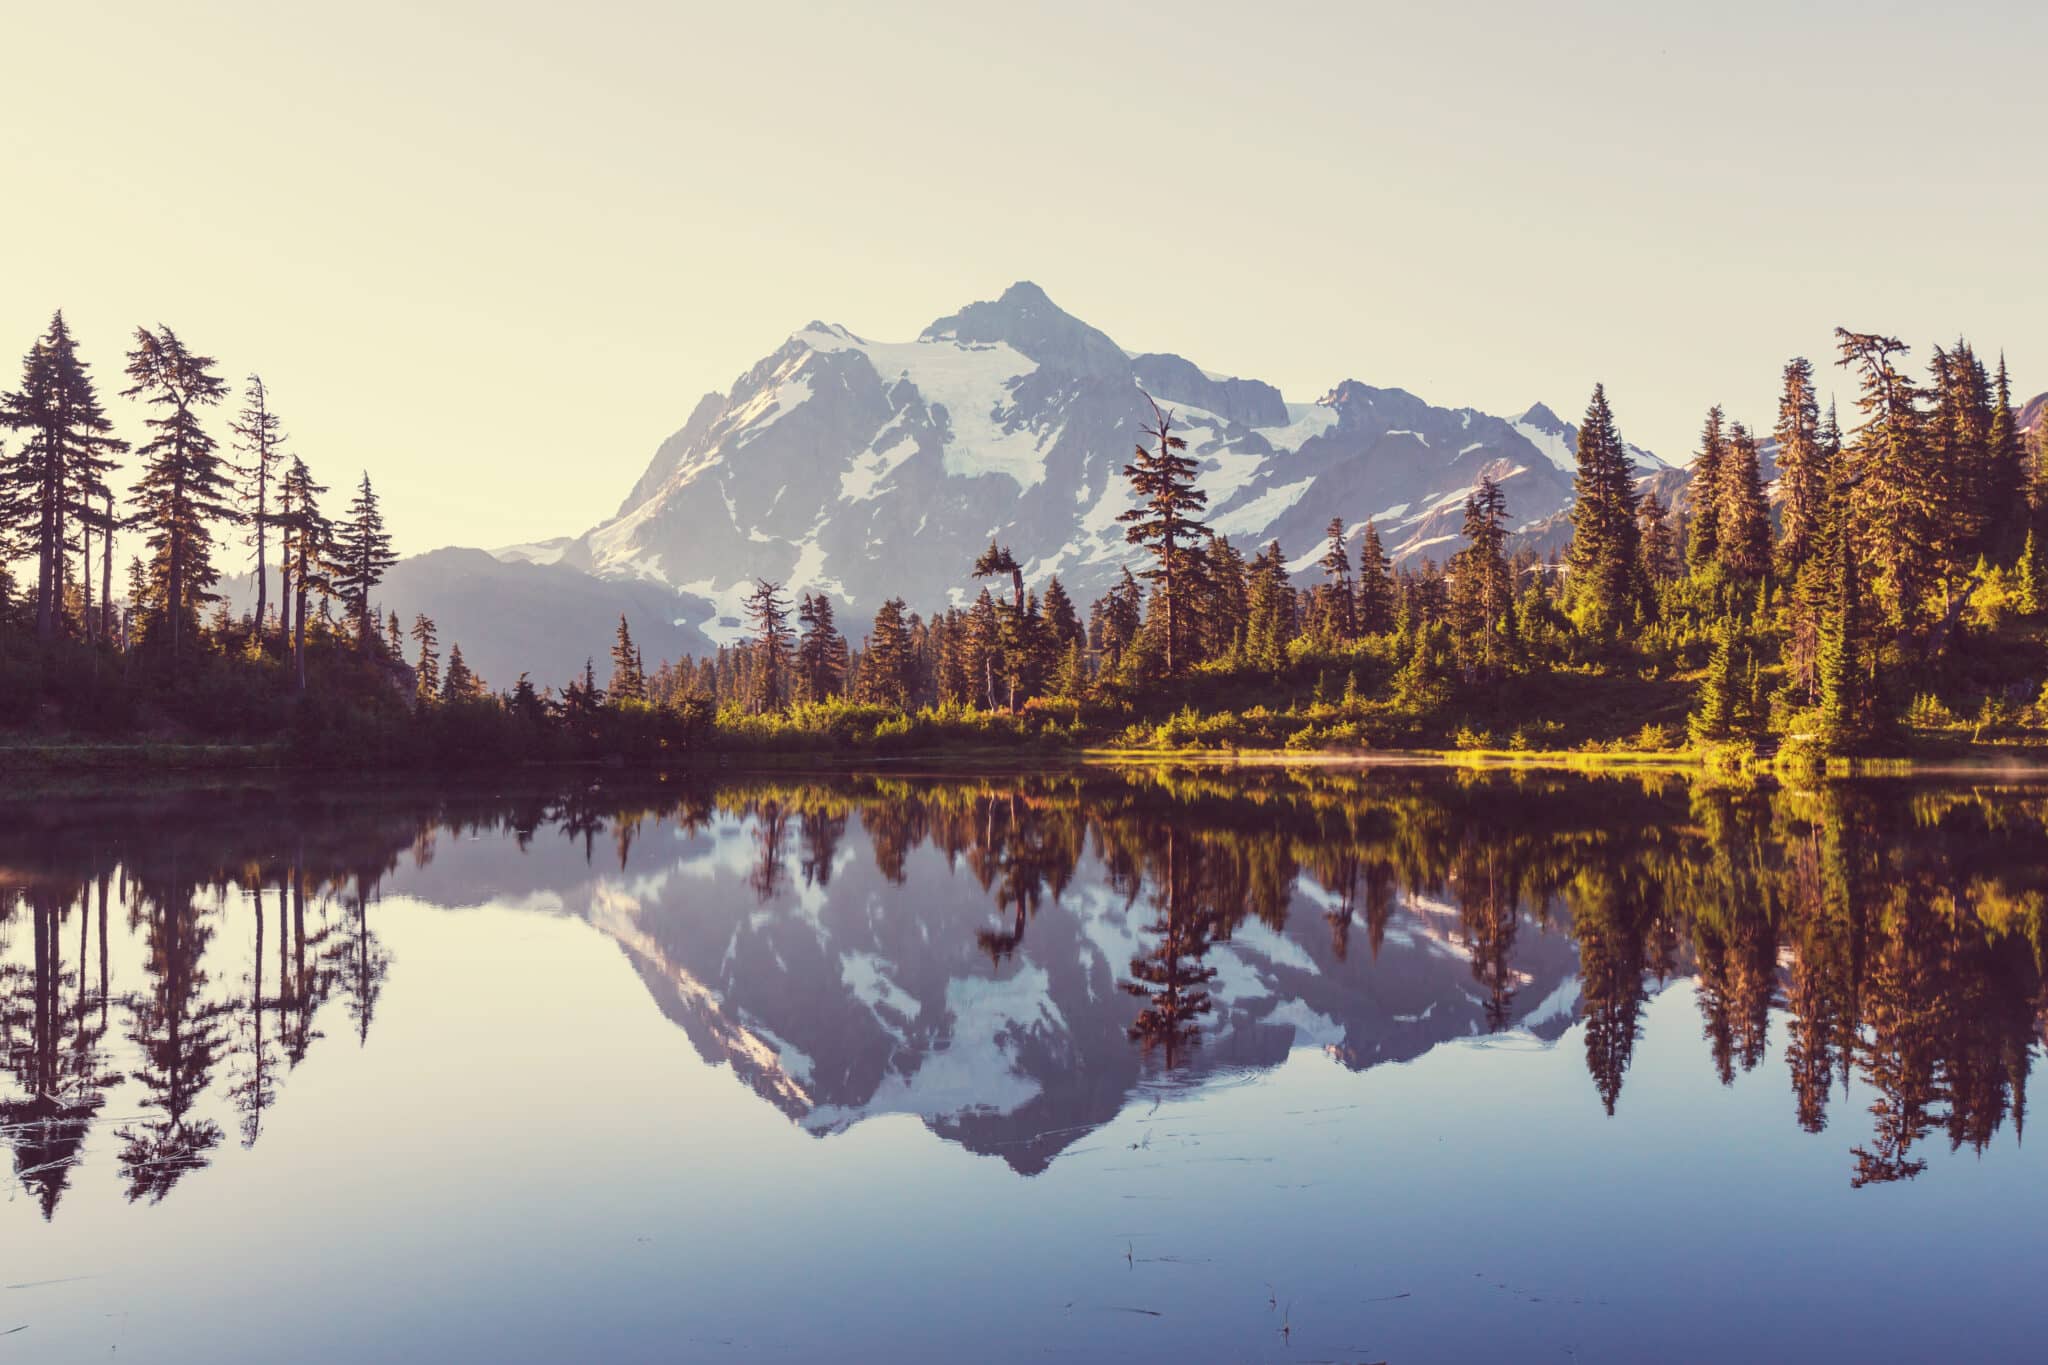 <p>There are SO many cool things to see and do in Washington – it’s amazing! You can hike a mountain with snow, walk through a rainforest, and lounge on an oceanside beach all on the same day.</p> <p><strong>Read more: <a href="https://www.have-clothes-will-travel.com/washington-state-road-trip/" rel="noreferrer noopener">Washington State Road Trip Itinerary for 1st-Time Visitors/Beginner Hikers</a></strong></p>